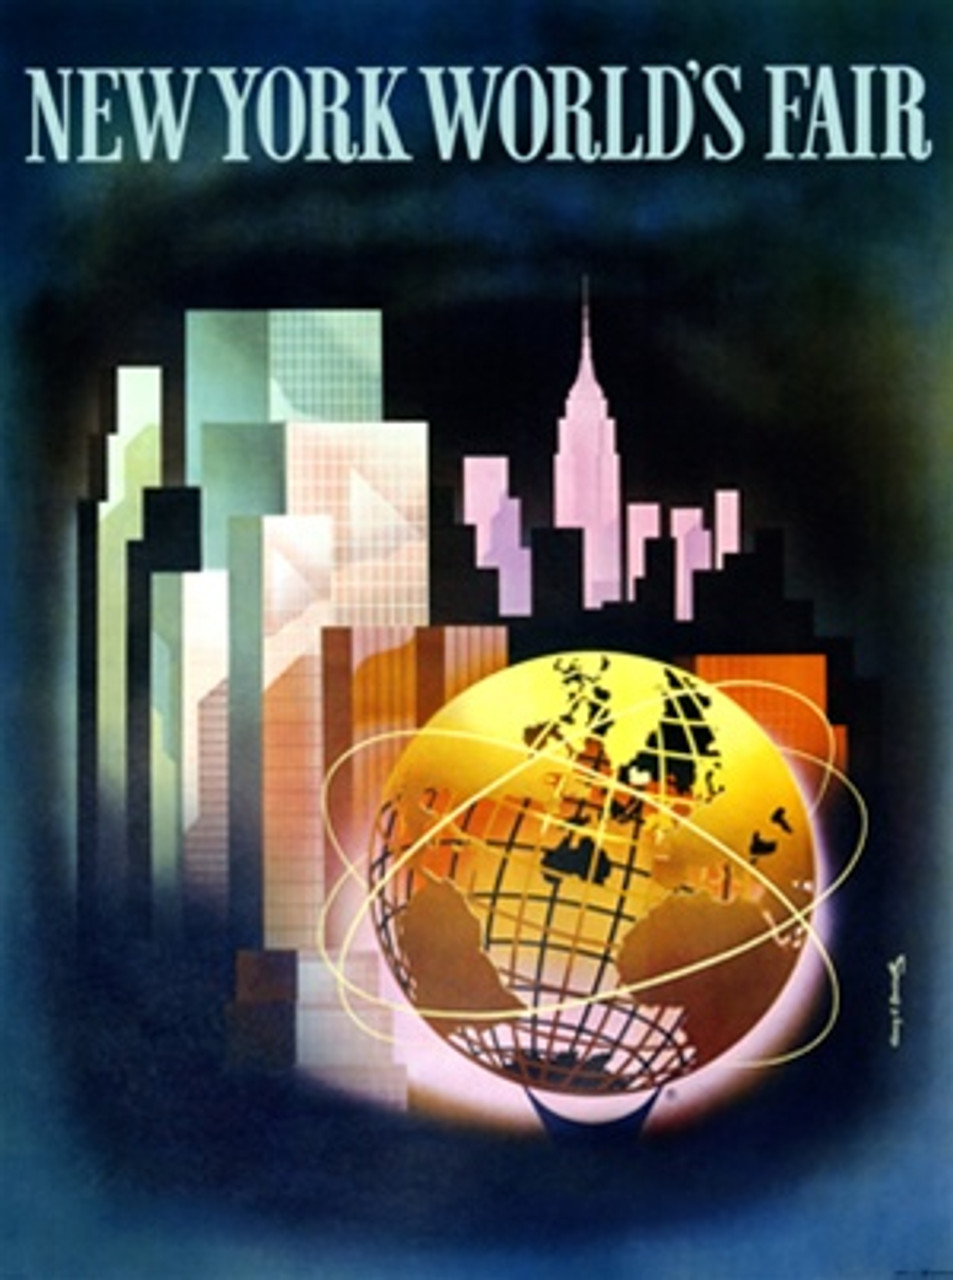 New York World's Fair by Bencathy 1963 America/USA - Vintage Poster Reproductions. This vertical American exhibition poster features the skyline at night with a gold globe in front of it surrounded by clouds. Giclee Advertising Print. Classic Posters